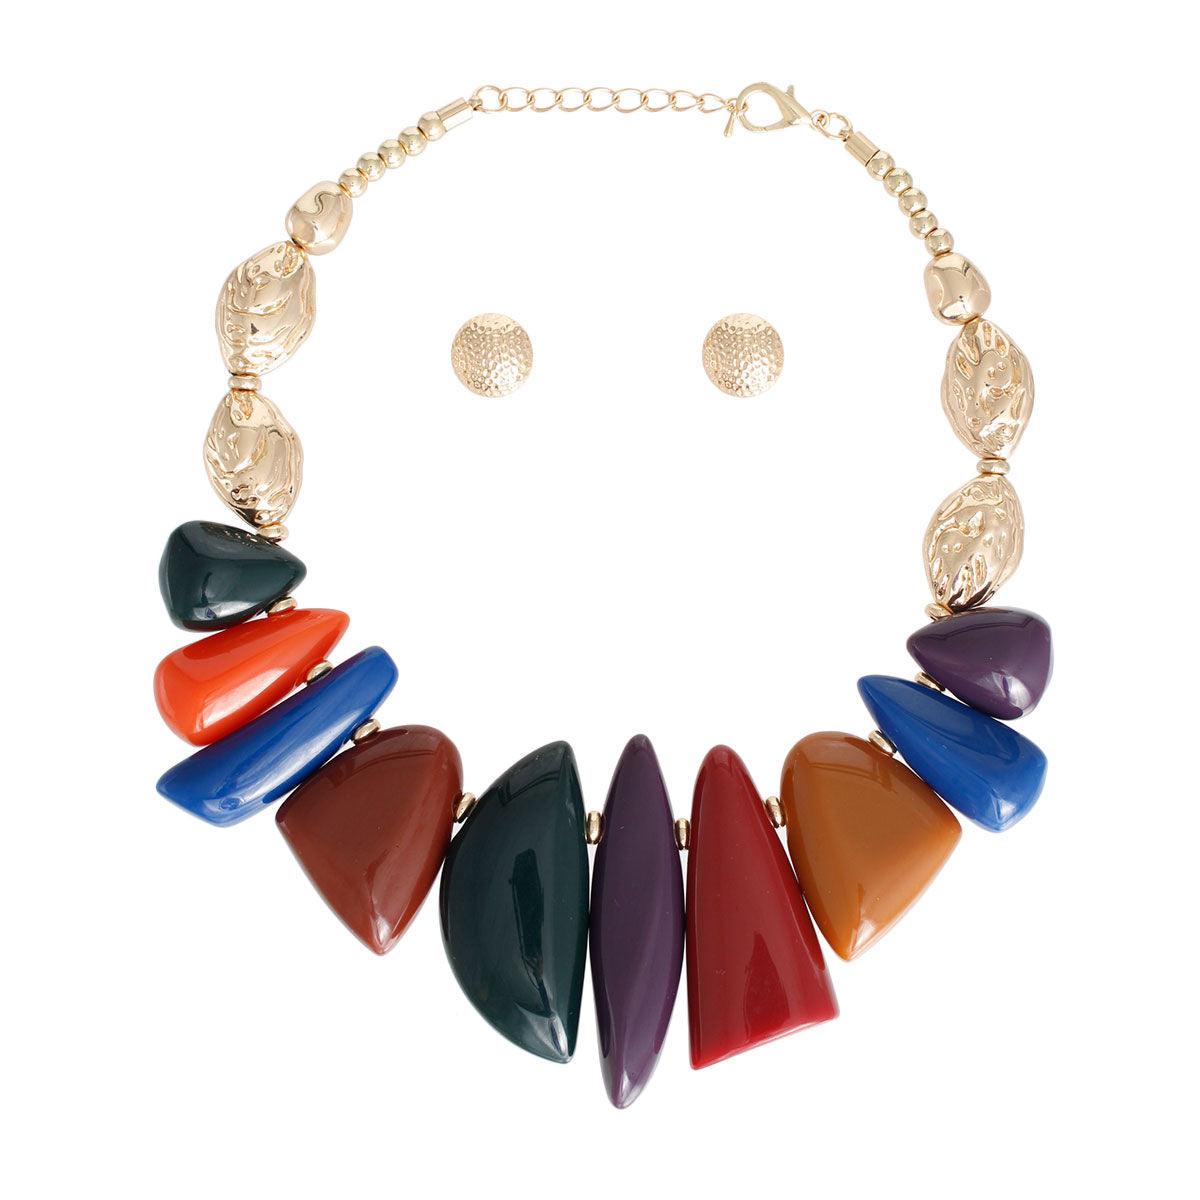 Chunky Multicolor Bead Necklace Set: Fashion Jewelry that Adds Flair